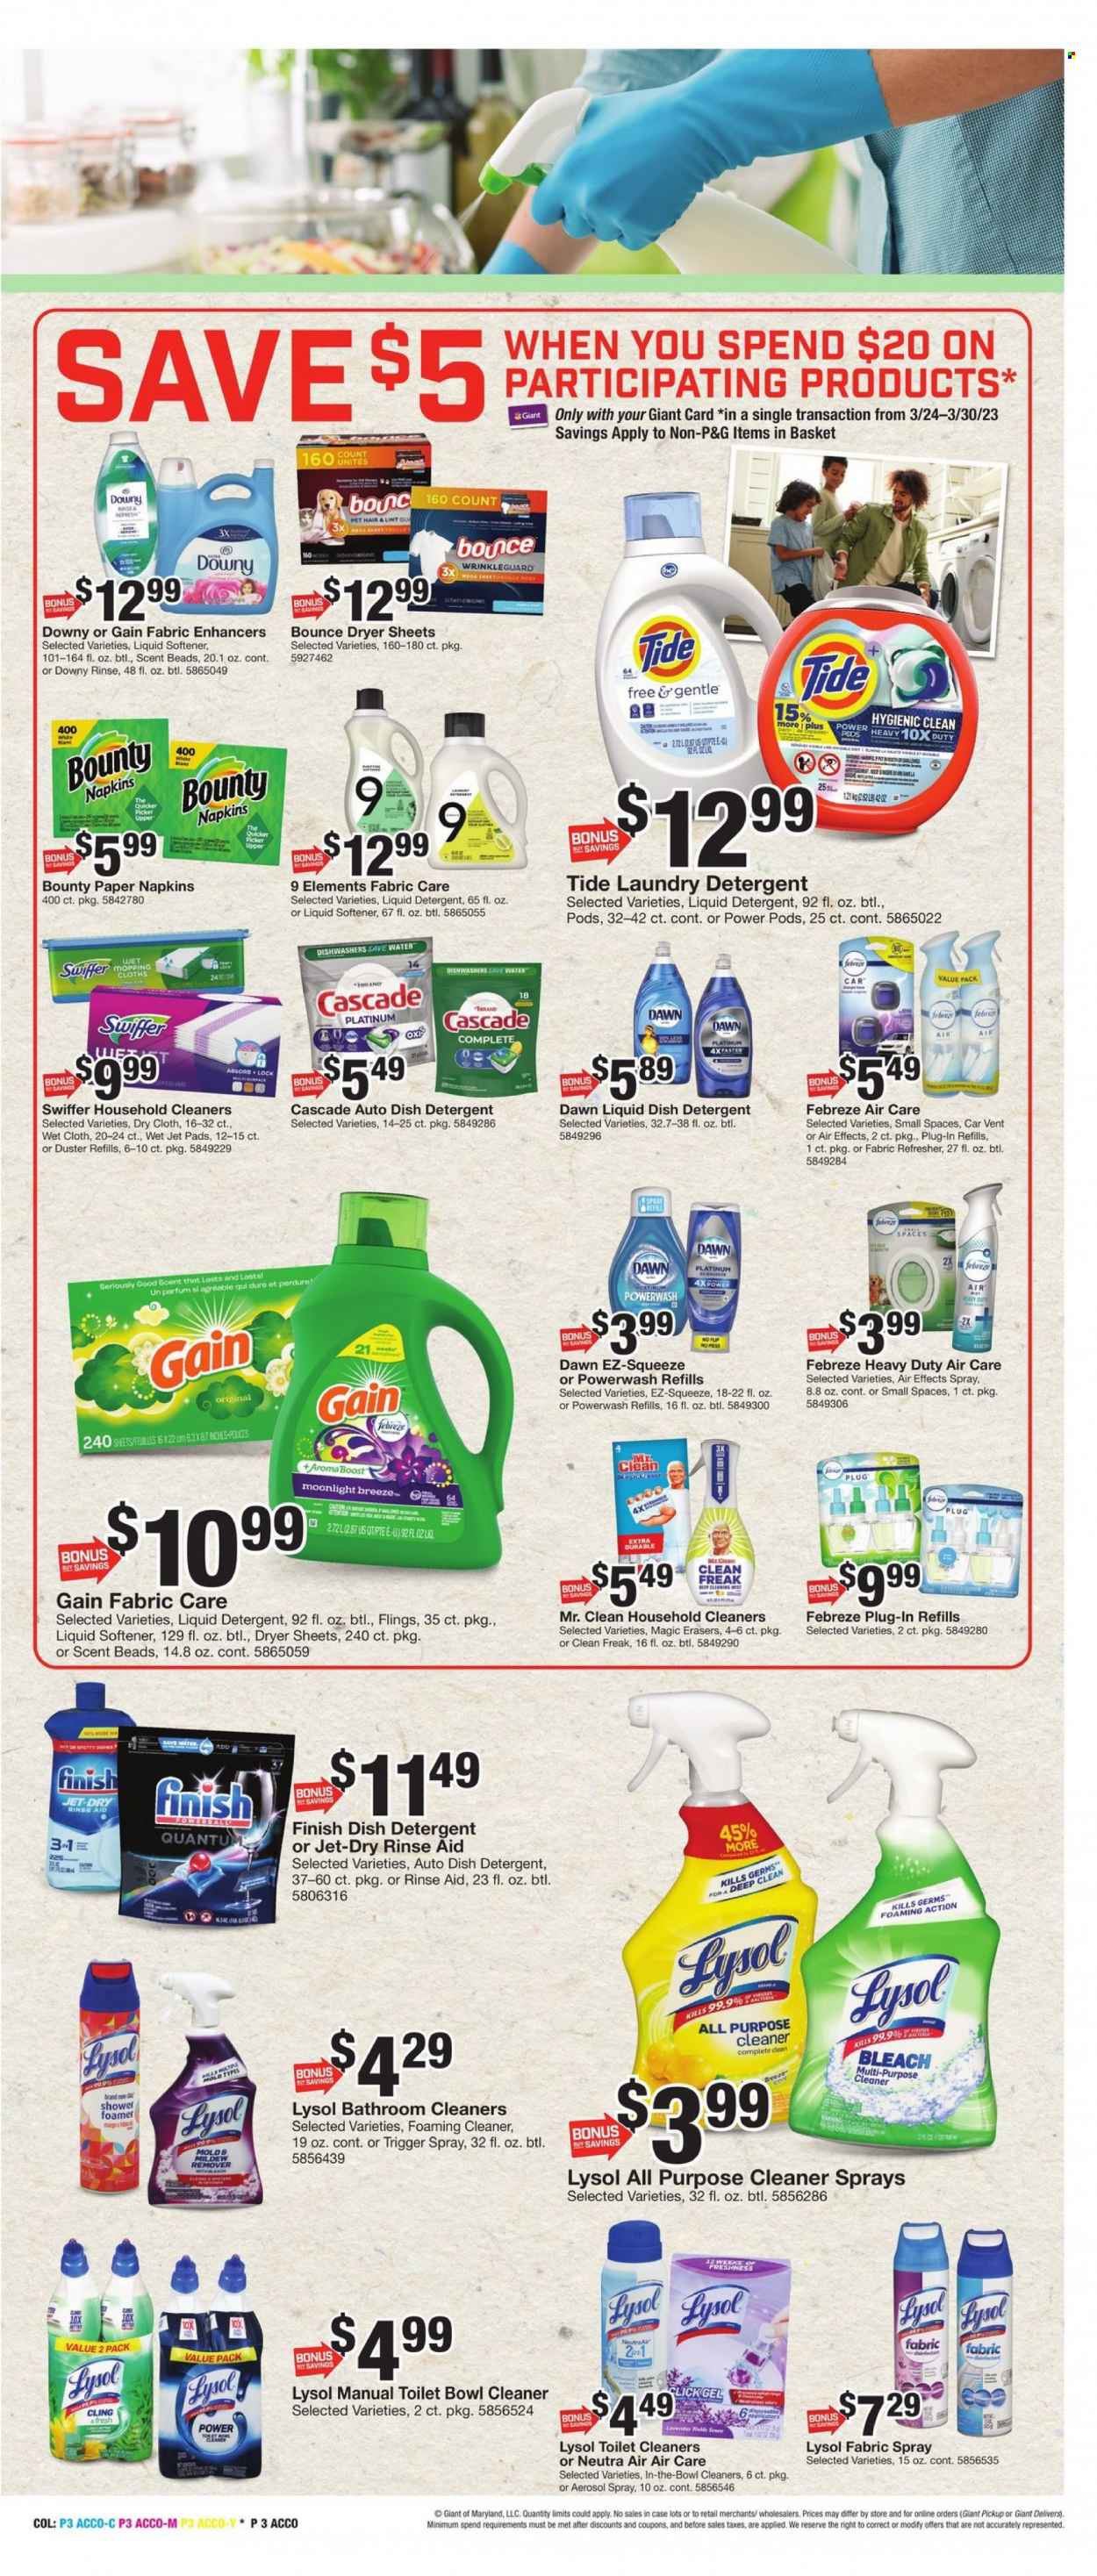 thumbnail - Giant Food Flyer - 03/24/2023 - 03/30/2023 - Sales products - Bounty, water, Boost, brandy, napkins, detergent, Febreze, Gain, cleaner, bleach, desinfection, all purpose cleaner, Lysol, Swiffer, Cascade, Tide, fabric softener, liquid detergent, laundry detergent, Bounce, dryer sheets, dishwasher cleaner, Jet, refresher, eau de parfum, basket, duster, paper. Page 5.